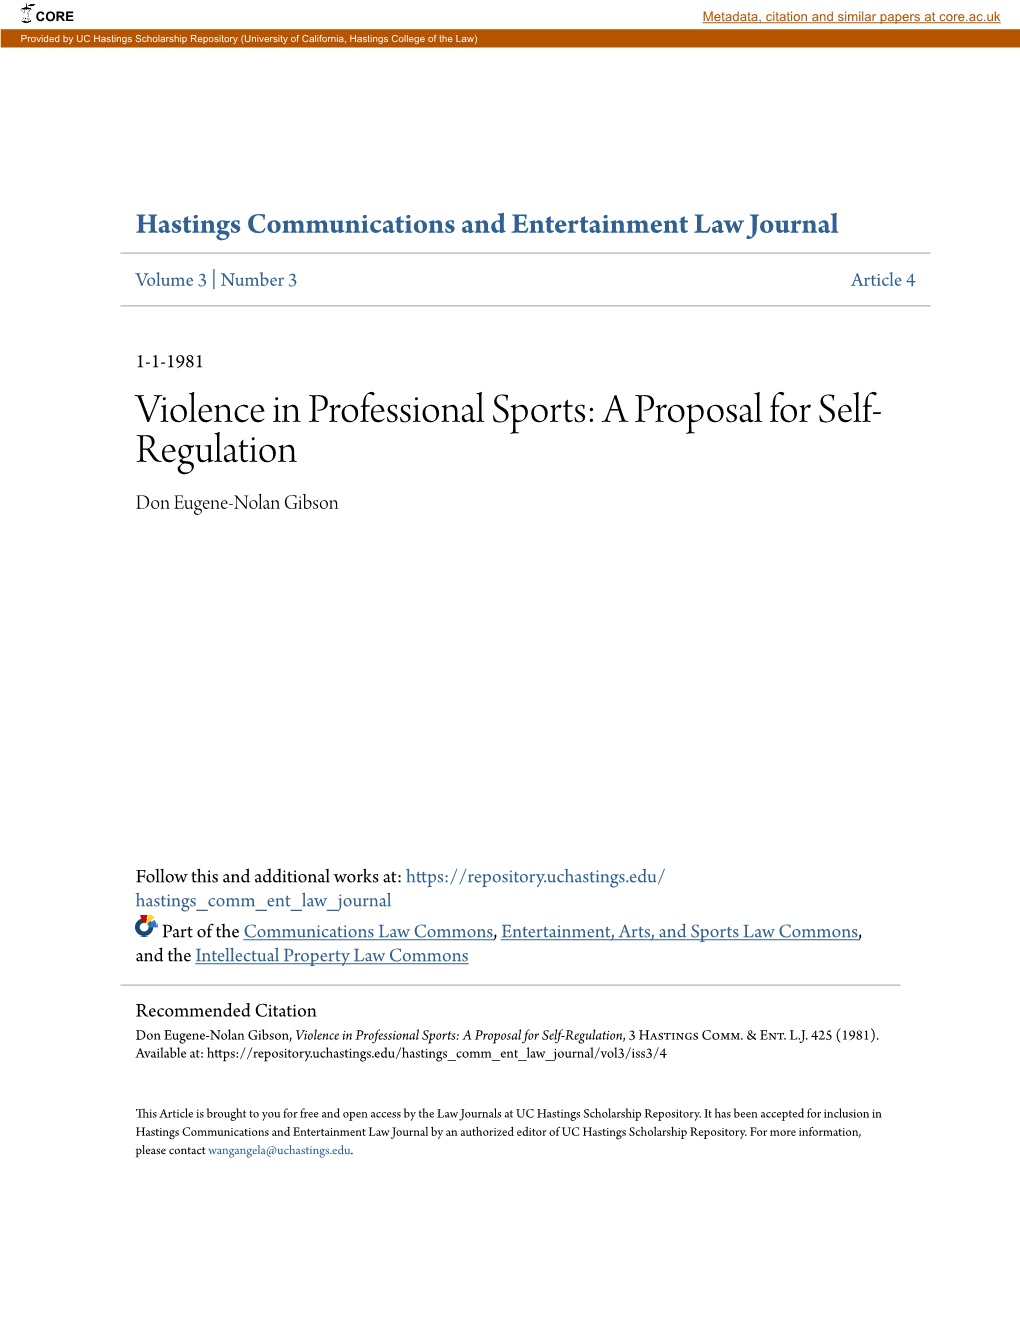 Violence in Professional Sports: a Proposal for Self- Regulation Don Eugene-Nolan Gibson